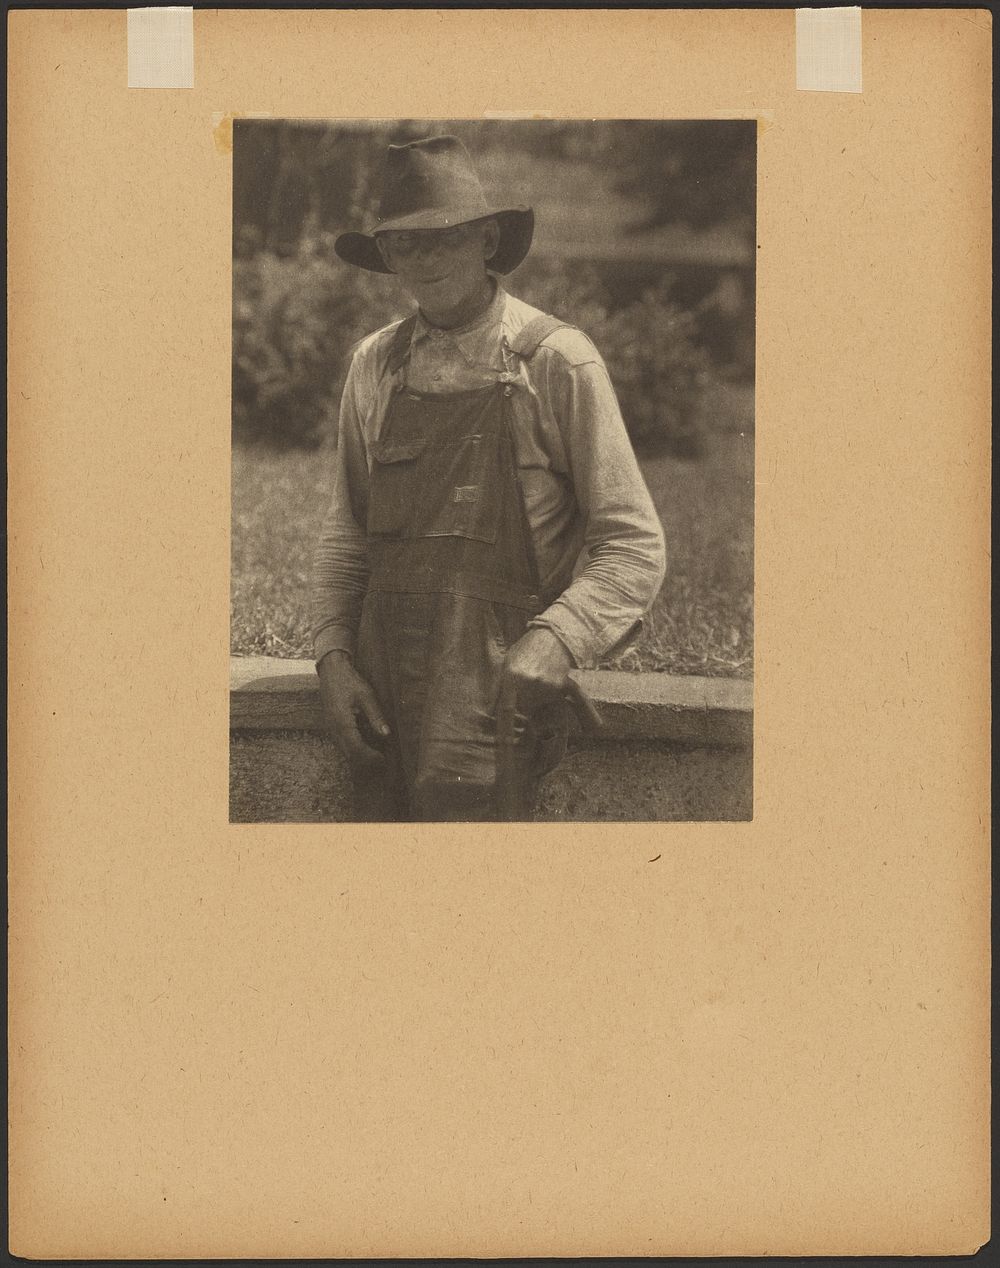 Man in Hat and Overall / Mr. Eversole, Hazard, KY by Doris Ulmann